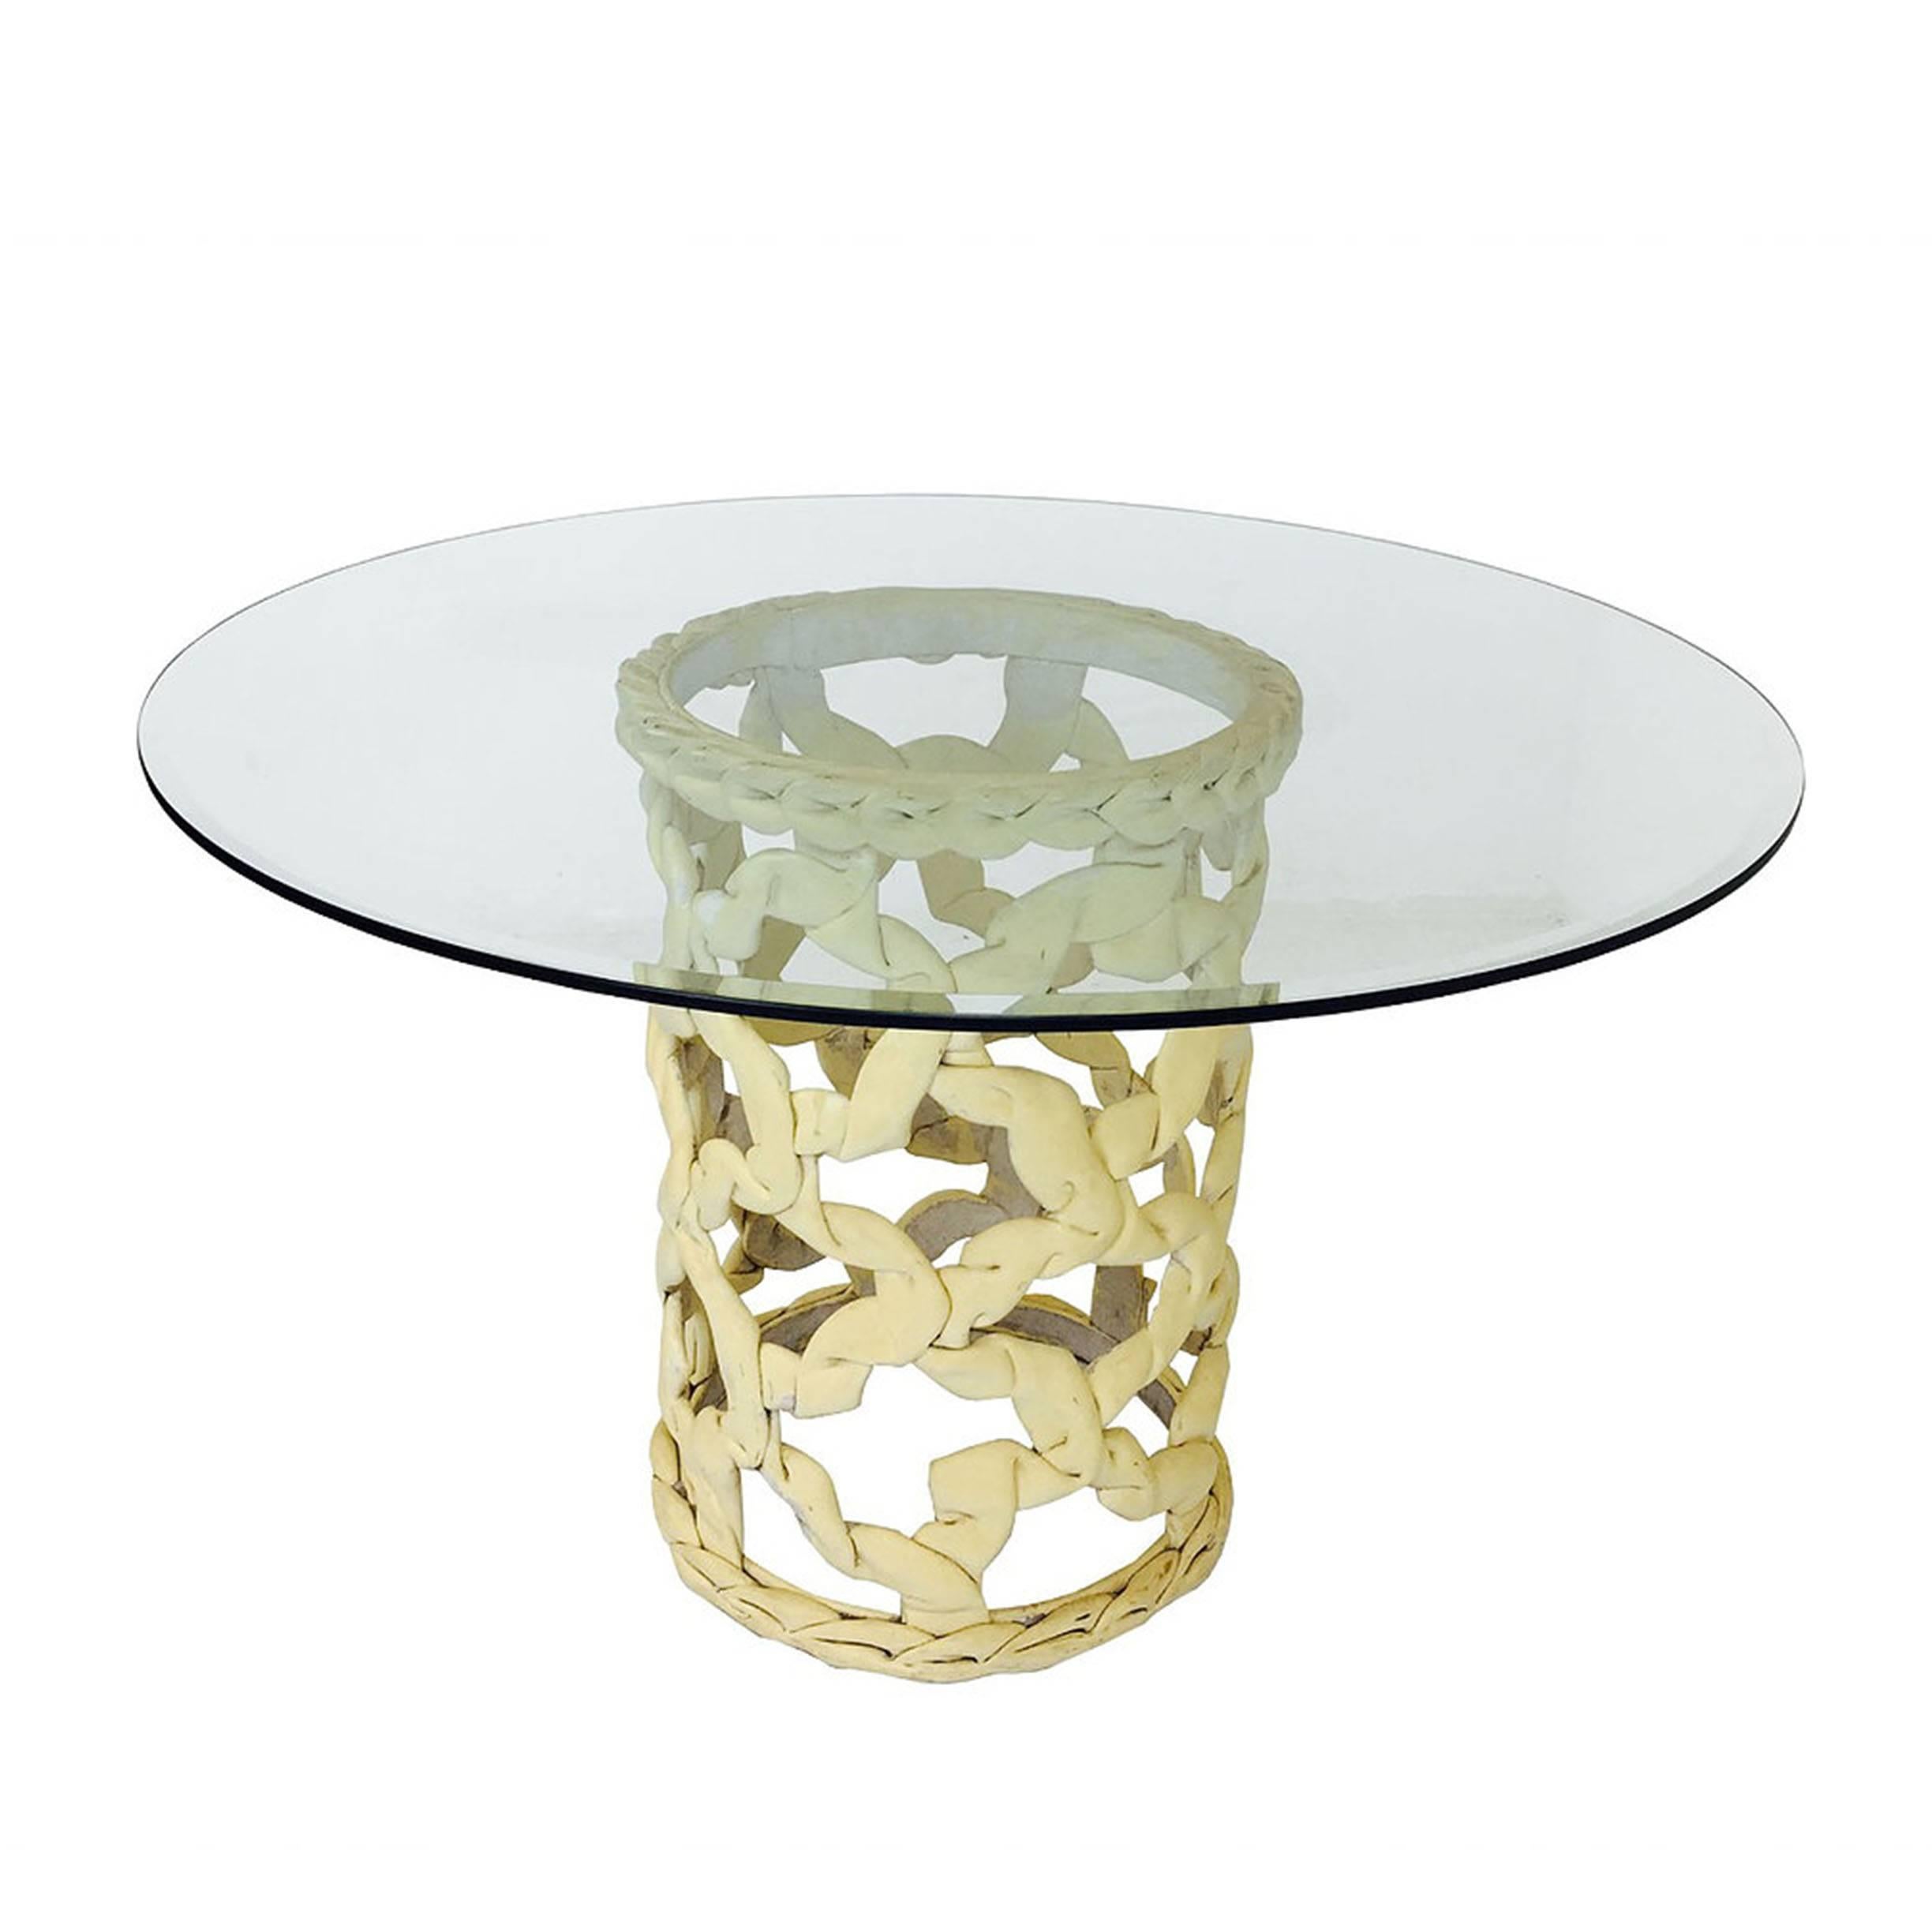 "Ribbon" Dining Table In the Style of Tony Duquette For Sale